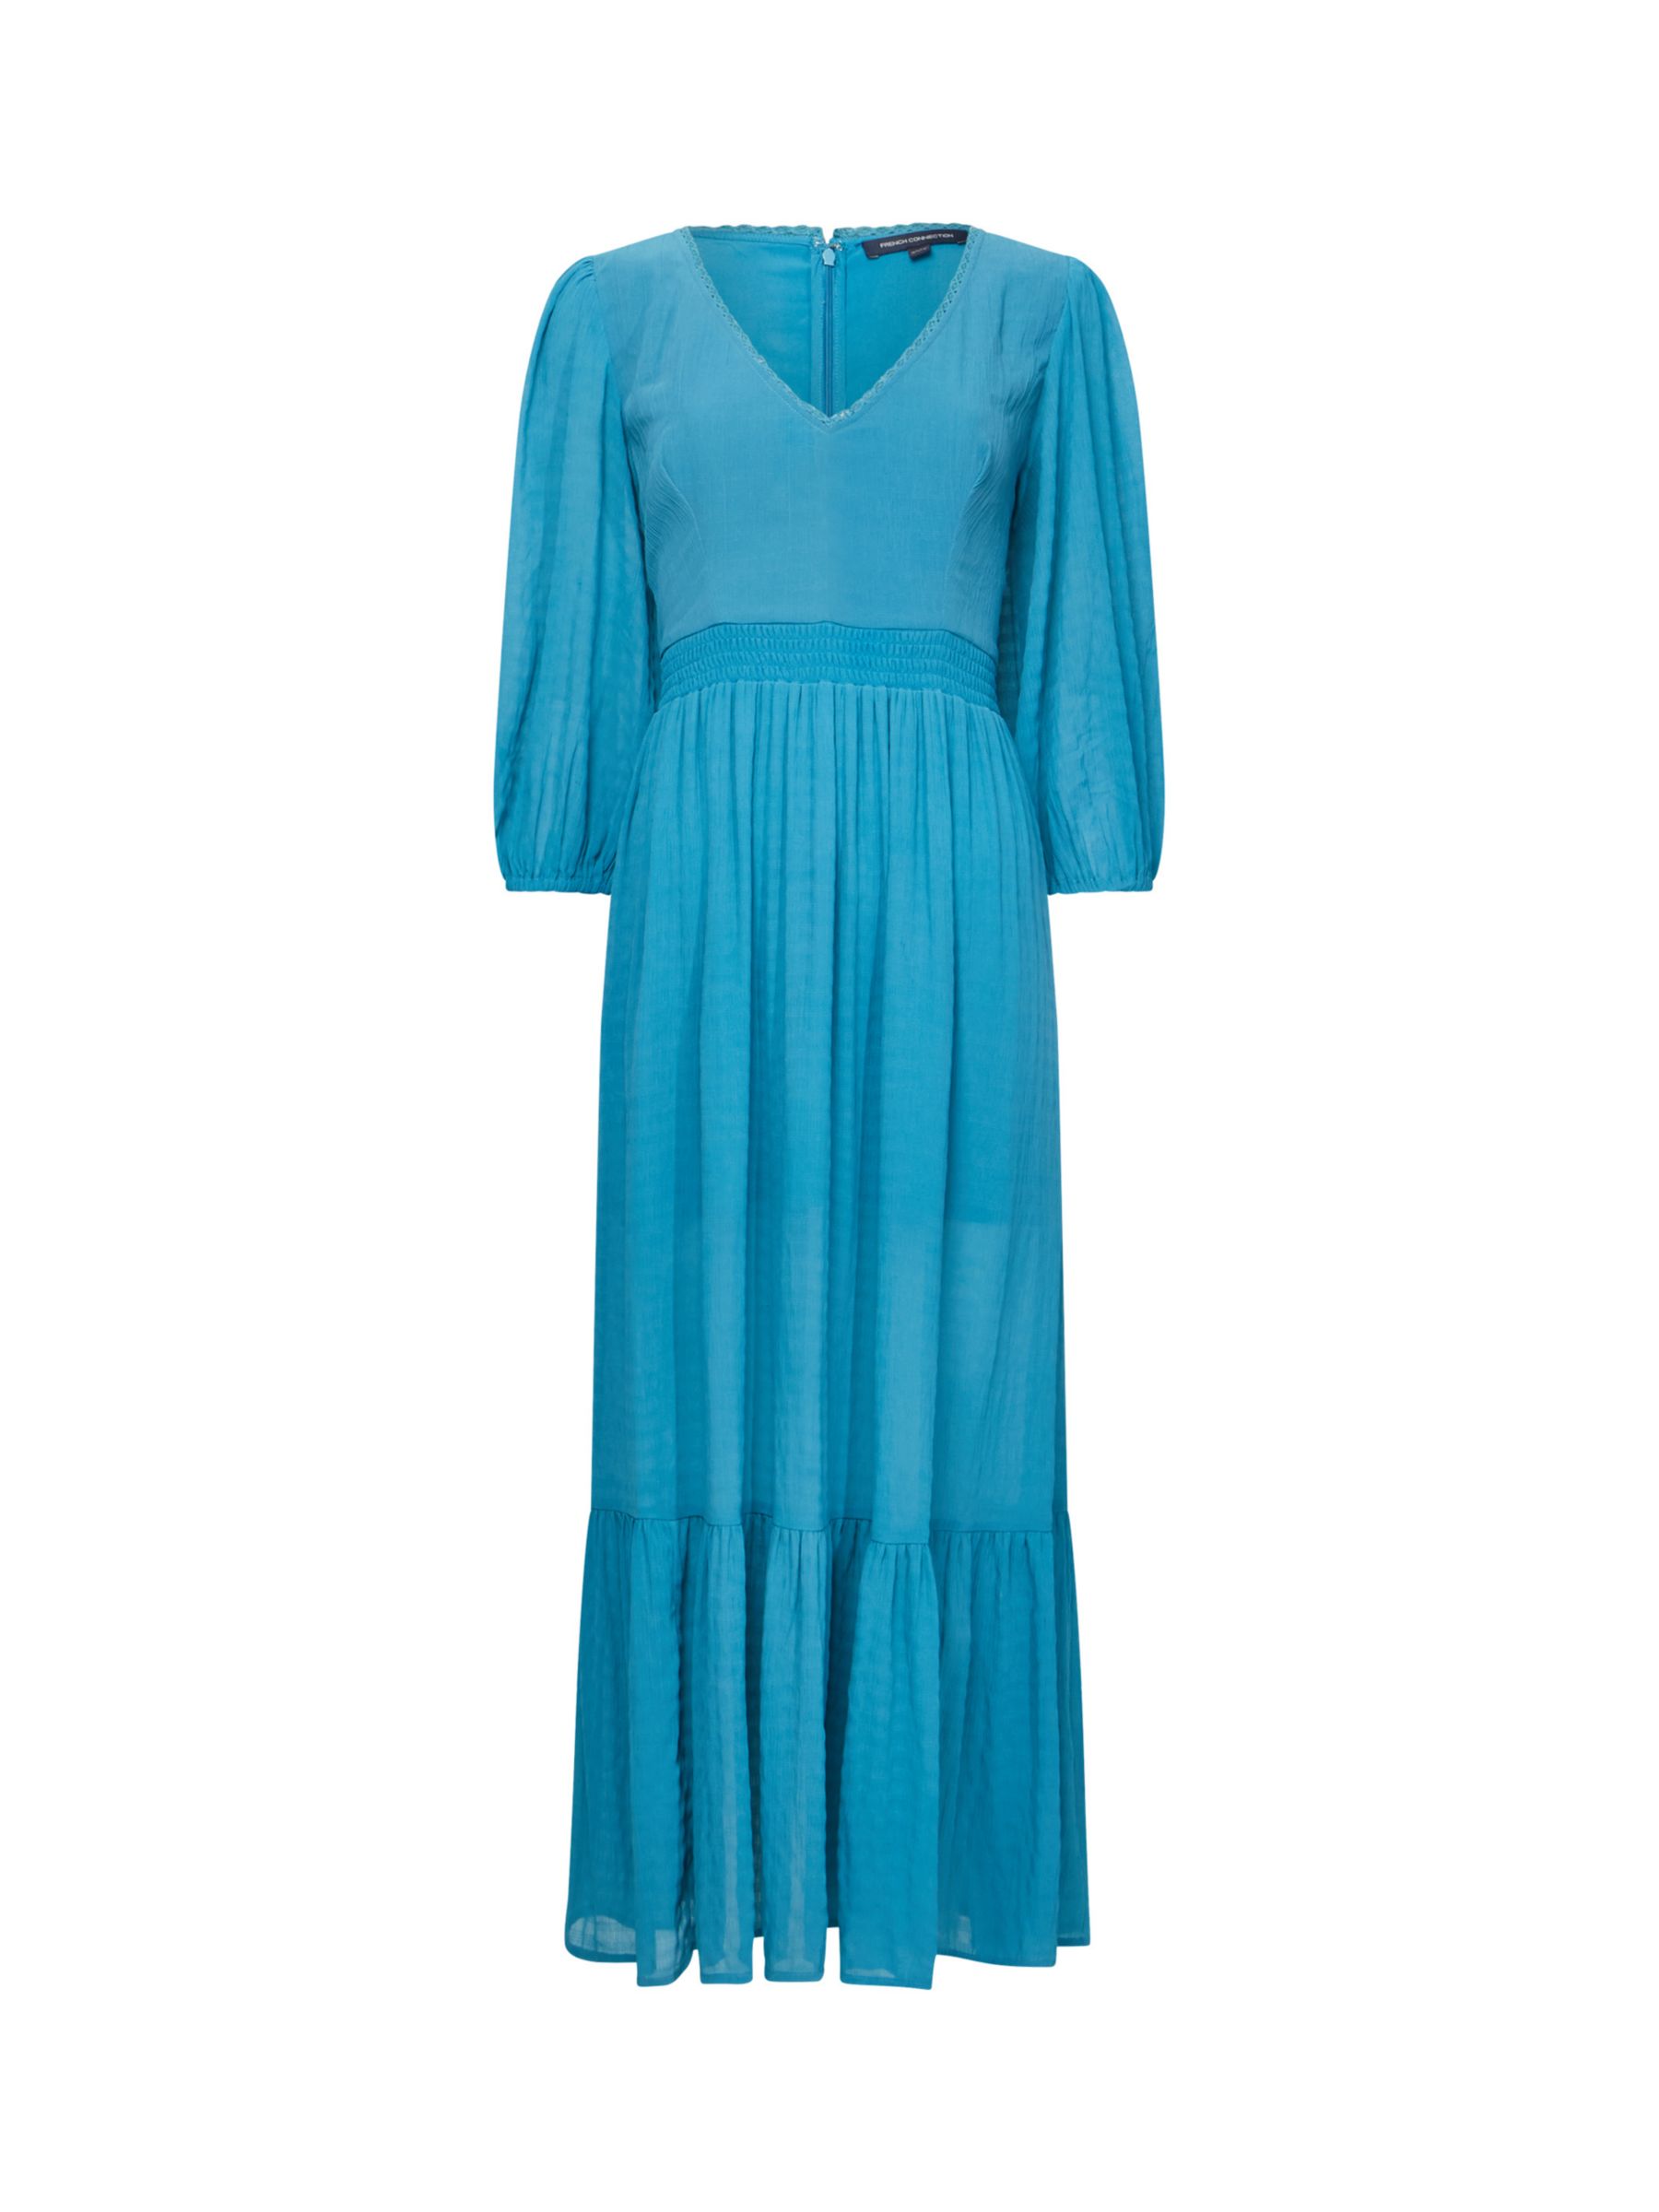 French Connection Cora Midi Dress at John Lewis & Partners